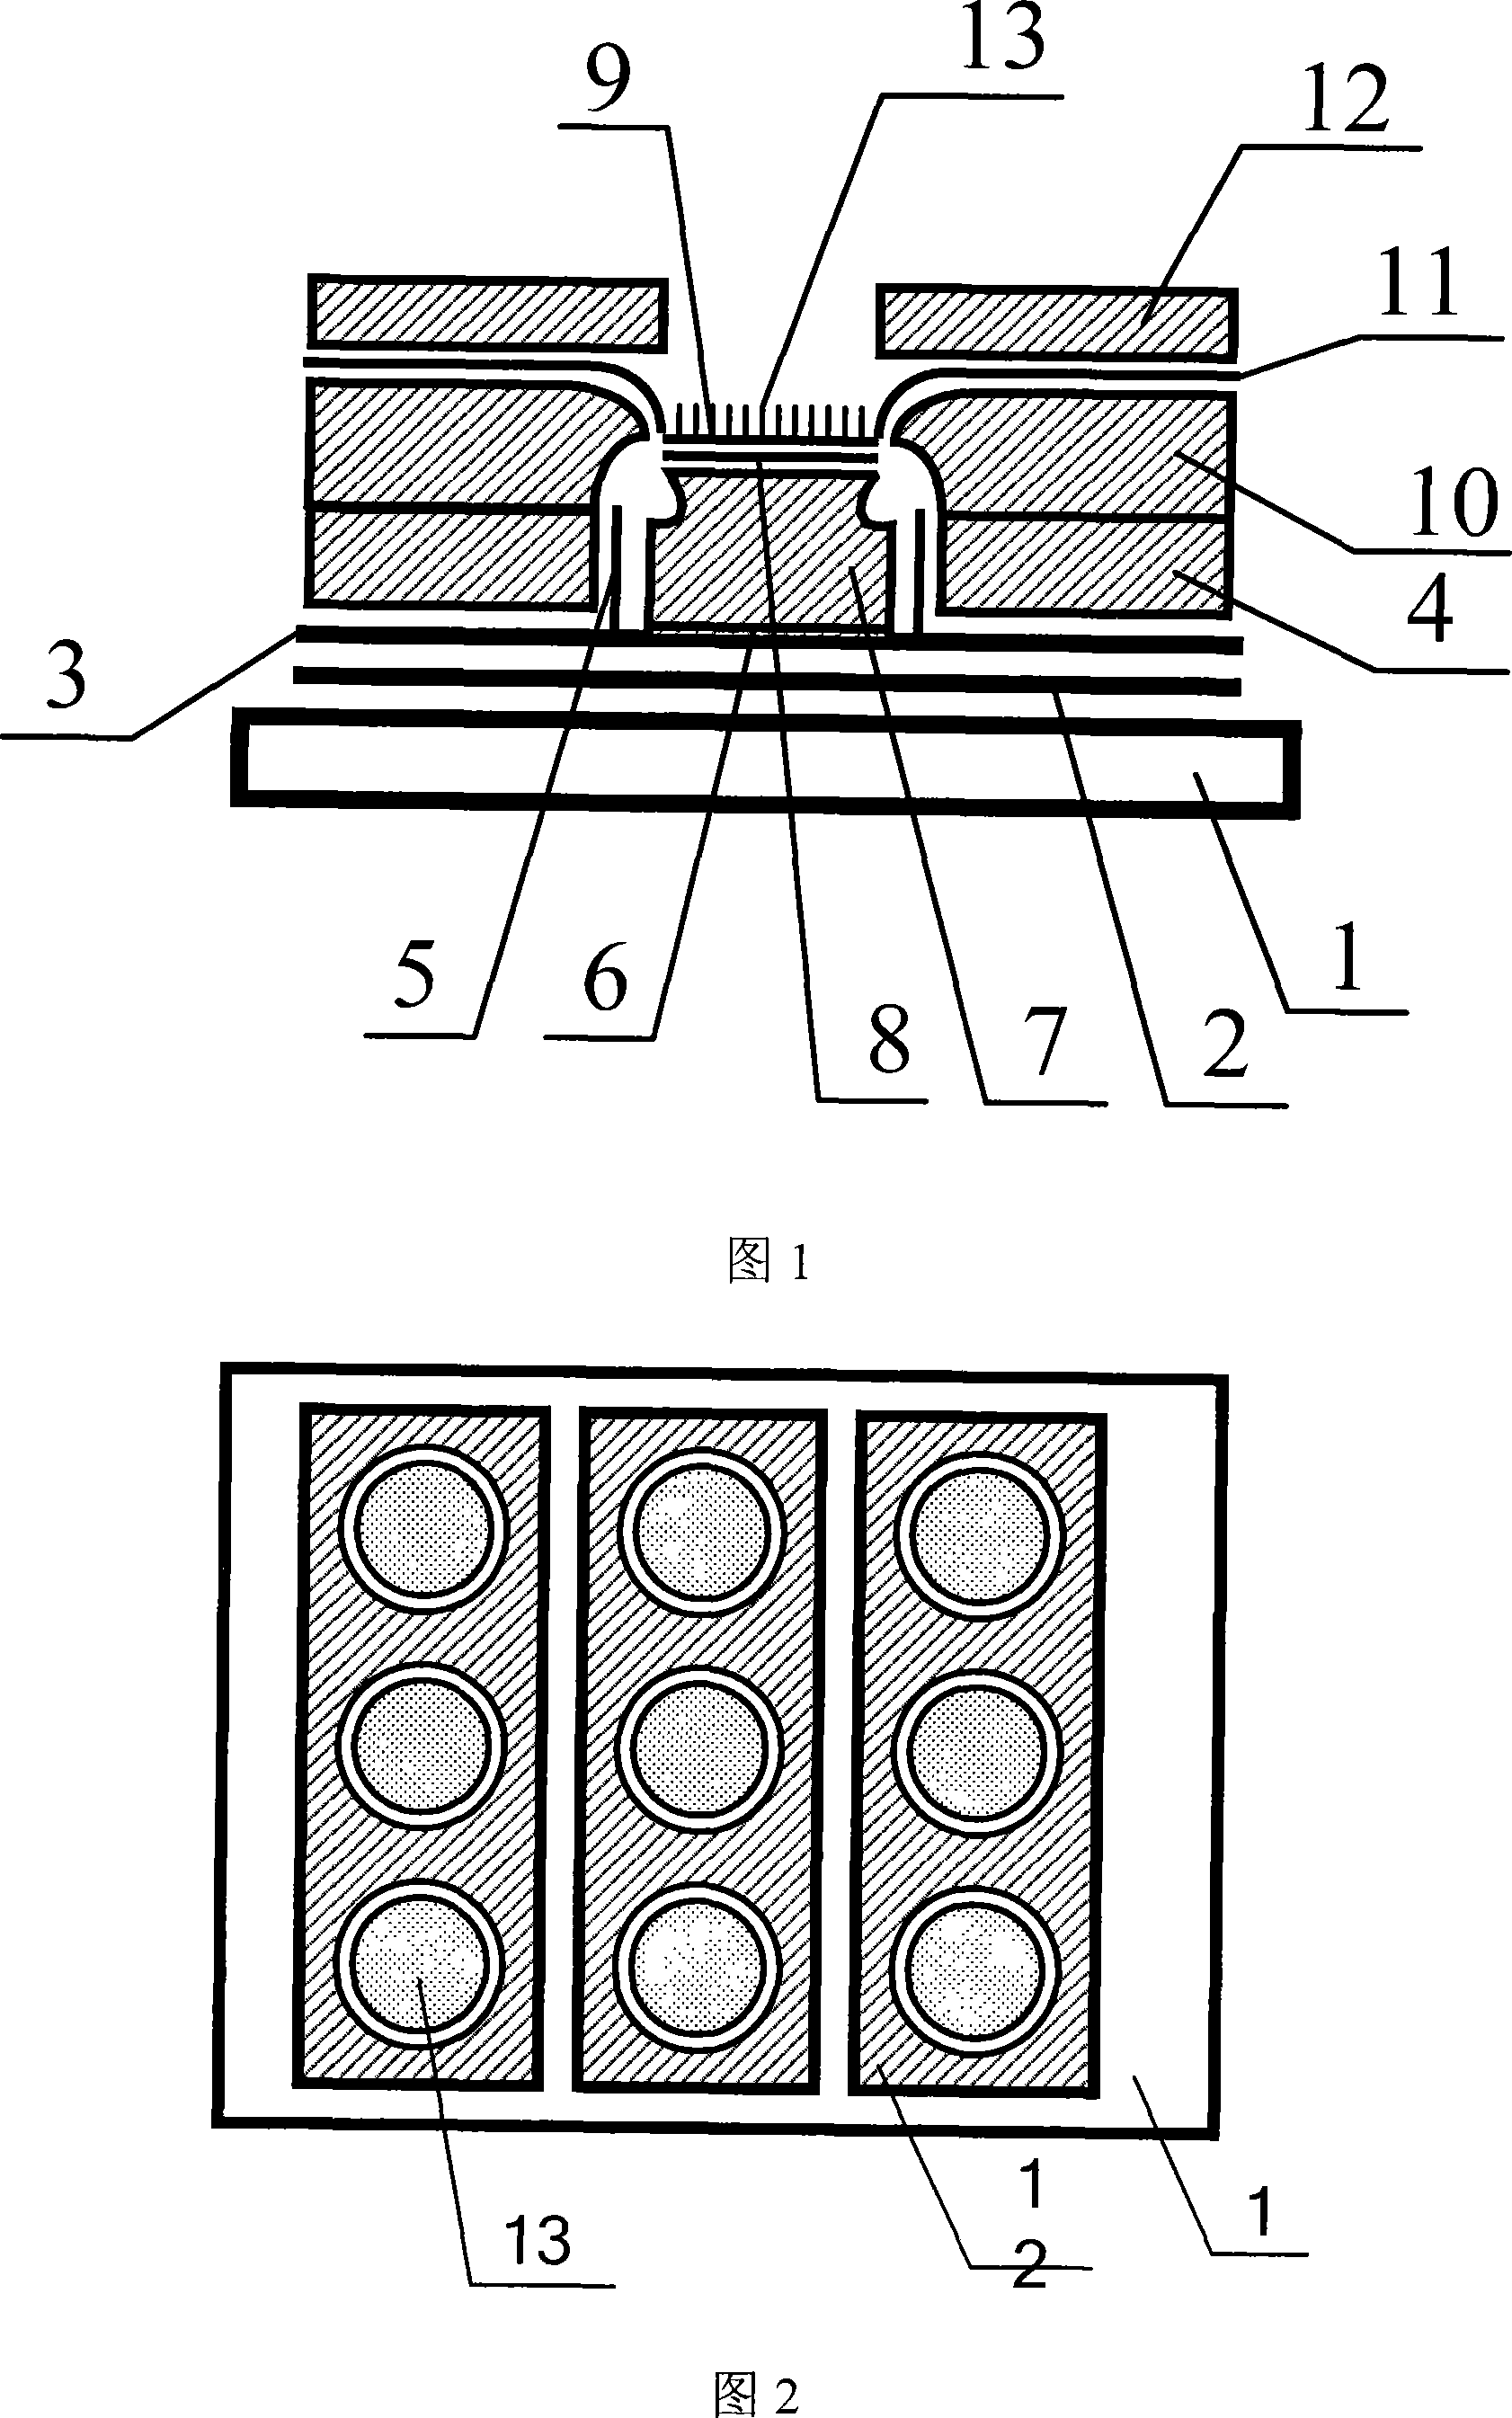 Flat-panel display device with circular cross-angle lower gate-modulated cathode structure and its preparing process